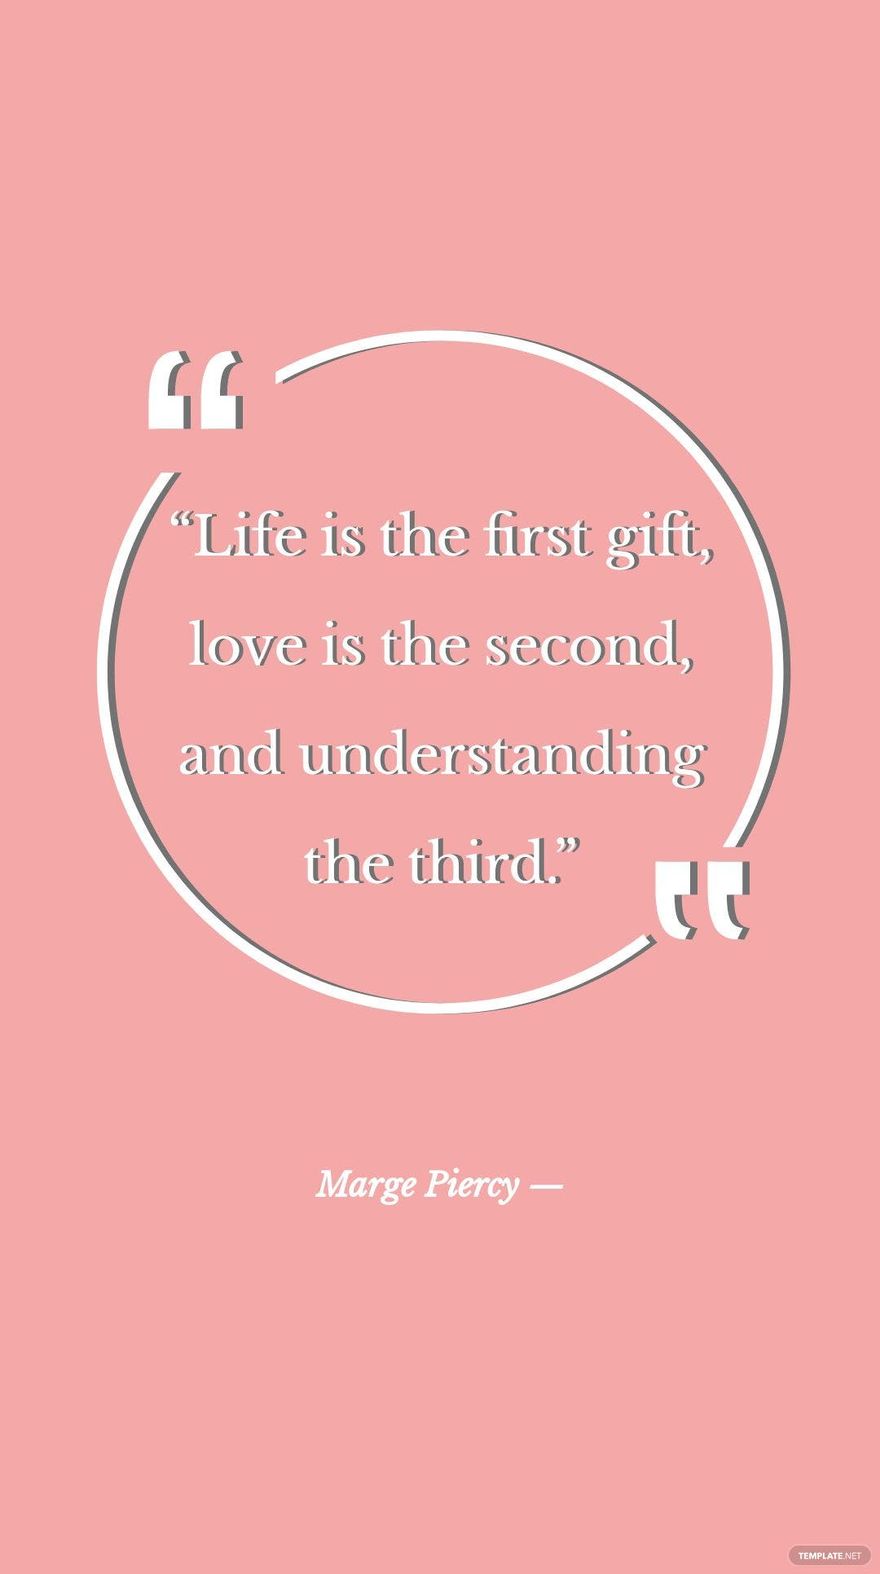 Marge Piercy — “Life is the first gift, love is the second, and understanding the third.”